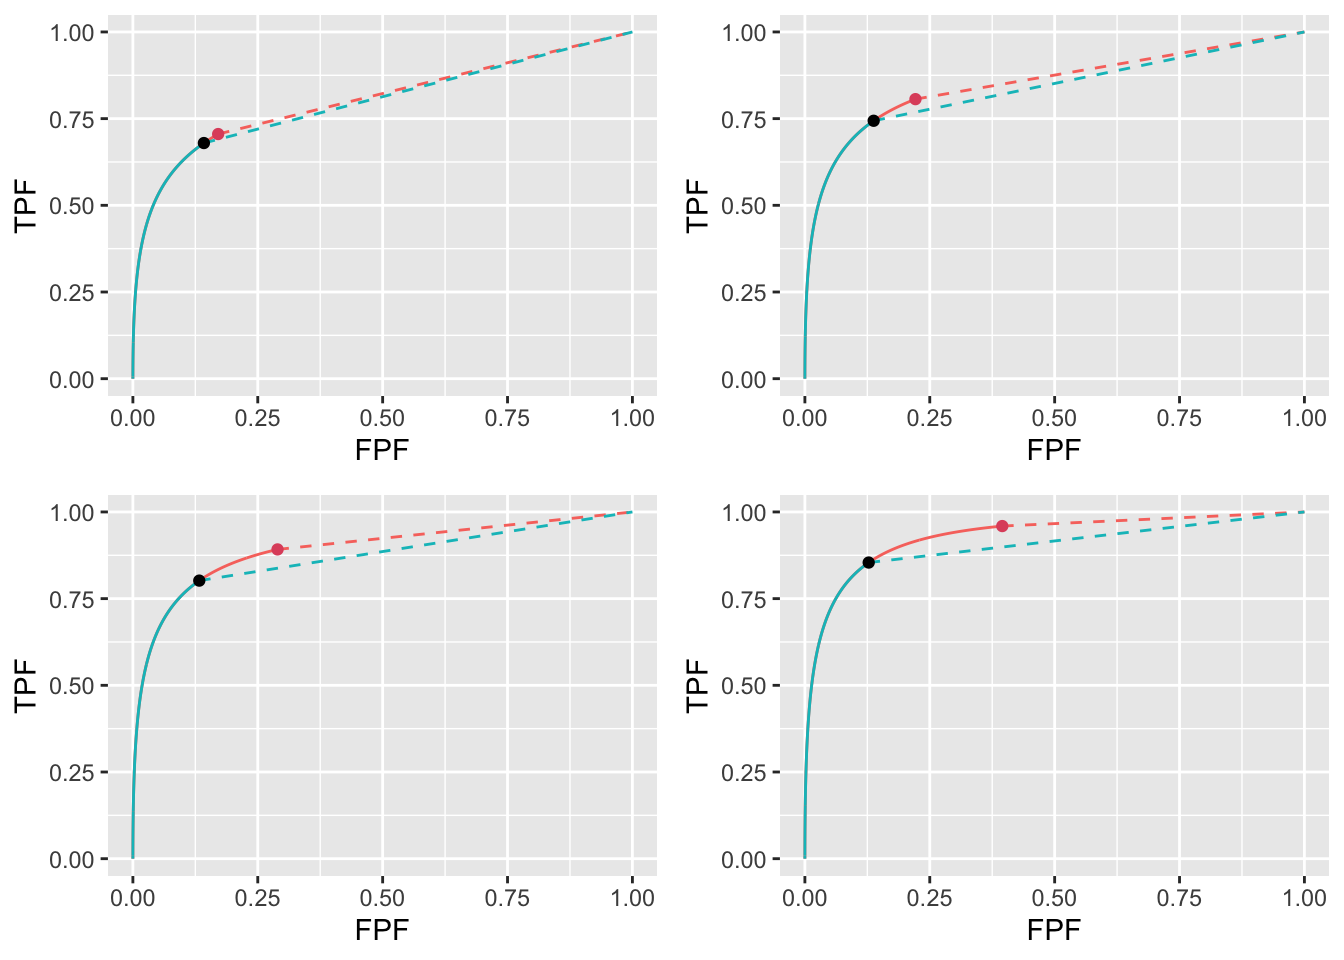 Varying $\nu$ ROC plots for the two optimization methods with superimposed operating points with superimposed operating points. The color coding is as in previous figures. The values of $\nu$ are: top-left $\nu = 0.6$, top-right $\nu = 0.7$, bottom-left $\nu = 0.8$ and bottom-right $\nu = 0.9$.